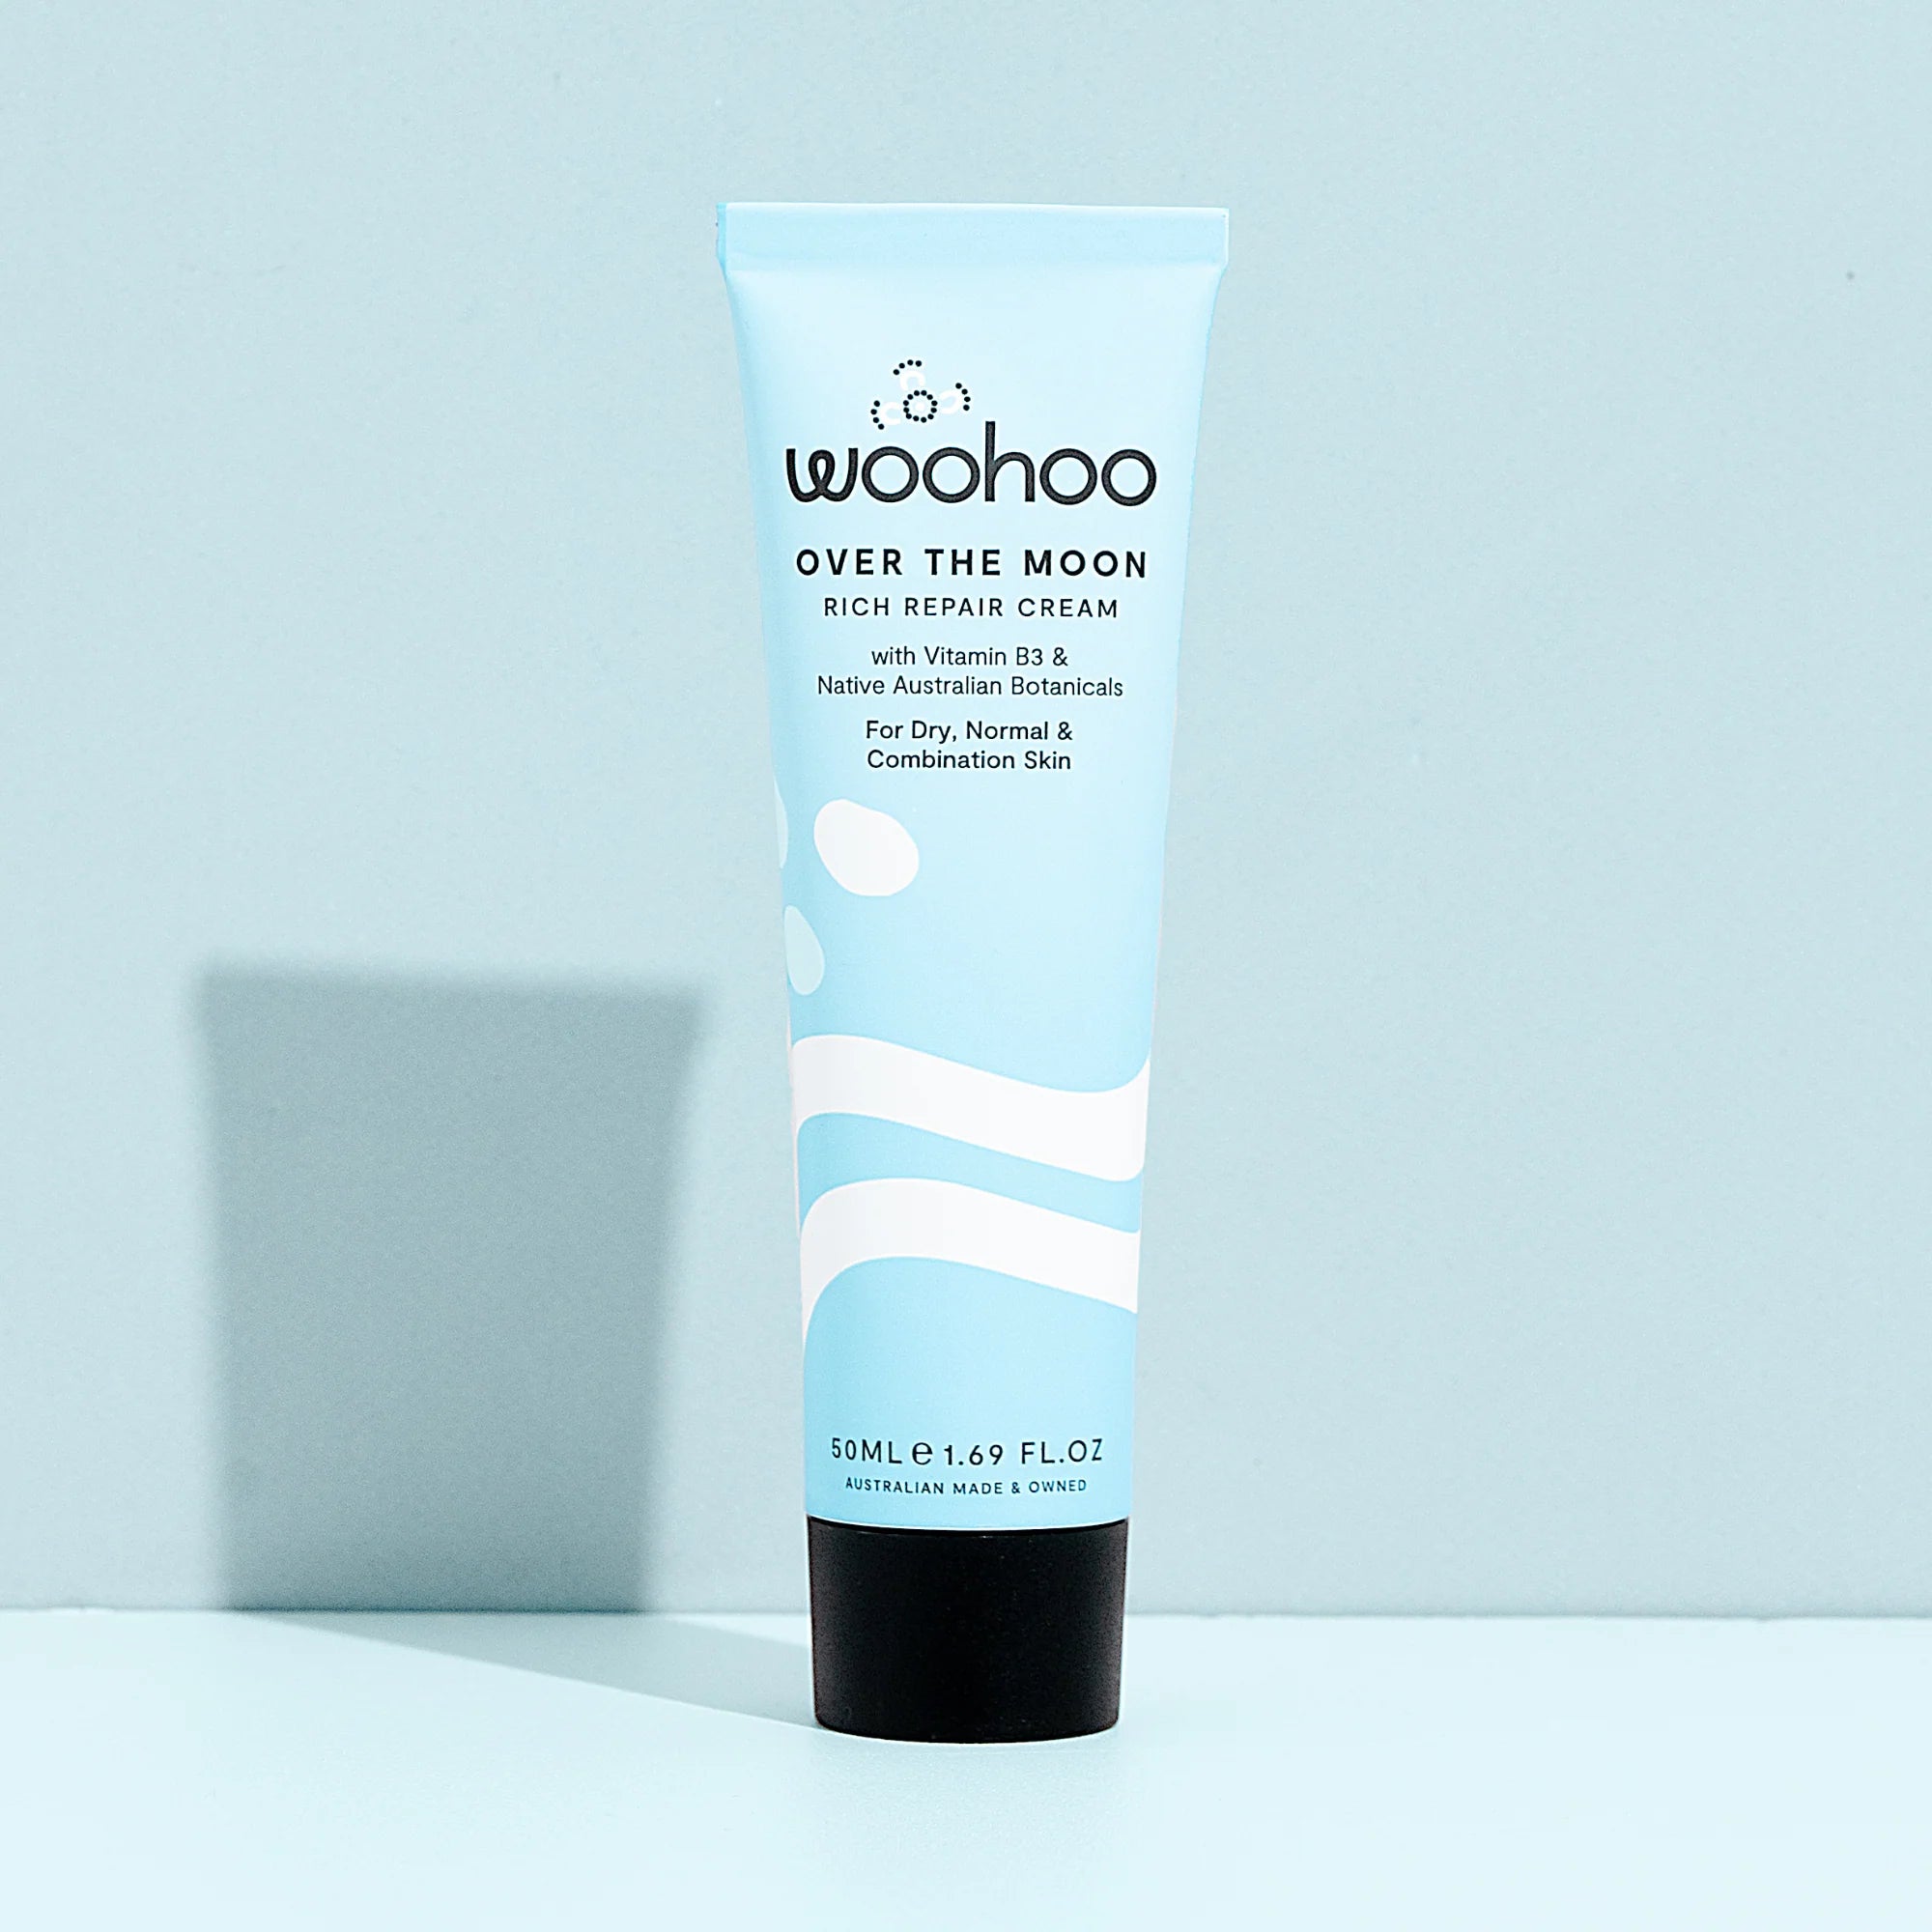 Image of the Woohoo Over The Moon Rich Repair Cream tube on a light blue background